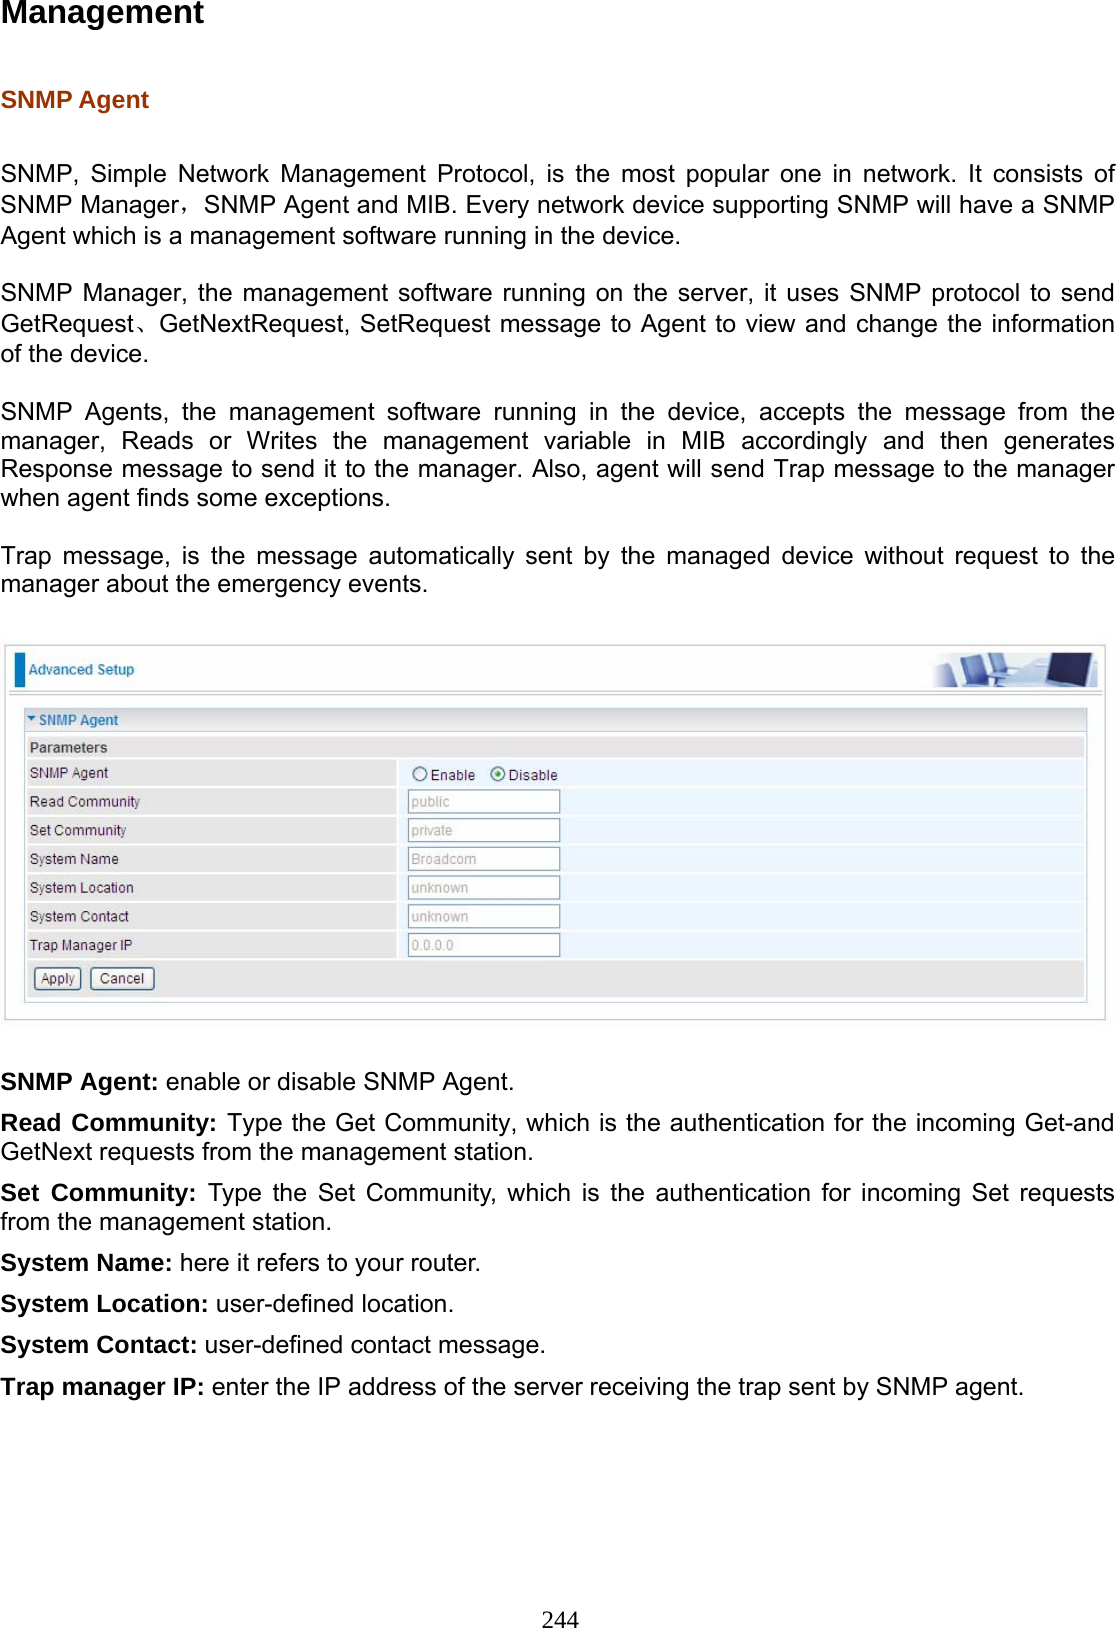 244 Management  SNMP Agent   SNMP, Simple Network Management Protocol, is the most popular one in network. It consists of SNMP Manager，SNMP Agent and MIB. Every network device supporting SNMP will have a SNMP Agent which is a management software running in the device.   SNMP Manager, the management software running on the server, it uses SNMP protocol to send GetRequest、GetNextRequest, SetRequest message to Agent to view and change the information of the device.  SNMP Agents, the management software running in the device, accepts the message from the manager, Reads or Writes the management variable in MIB accordingly and then generates Response message to send it to the manager. Also, agent will send Trap message to the manager when agent finds some exceptions.   Trap message, is the message automatically sent by the managed device without request to the manager about the emergency events.    SNMP Agent: enable or disable SNMP Agent.  Read Community: Type the Get Community, which is the authentication for the incoming Get-and GetNext requests from the management station.  Set Community: Type the Set Community, which is the authentication for incoming Set requests from the management station.  System Name: here it refers to your router. System Location: user-defined location. System Contact: user-defined contact message. Trap manager IP: enter the IP address of the server receiving the trap sent by SNMP agent.   